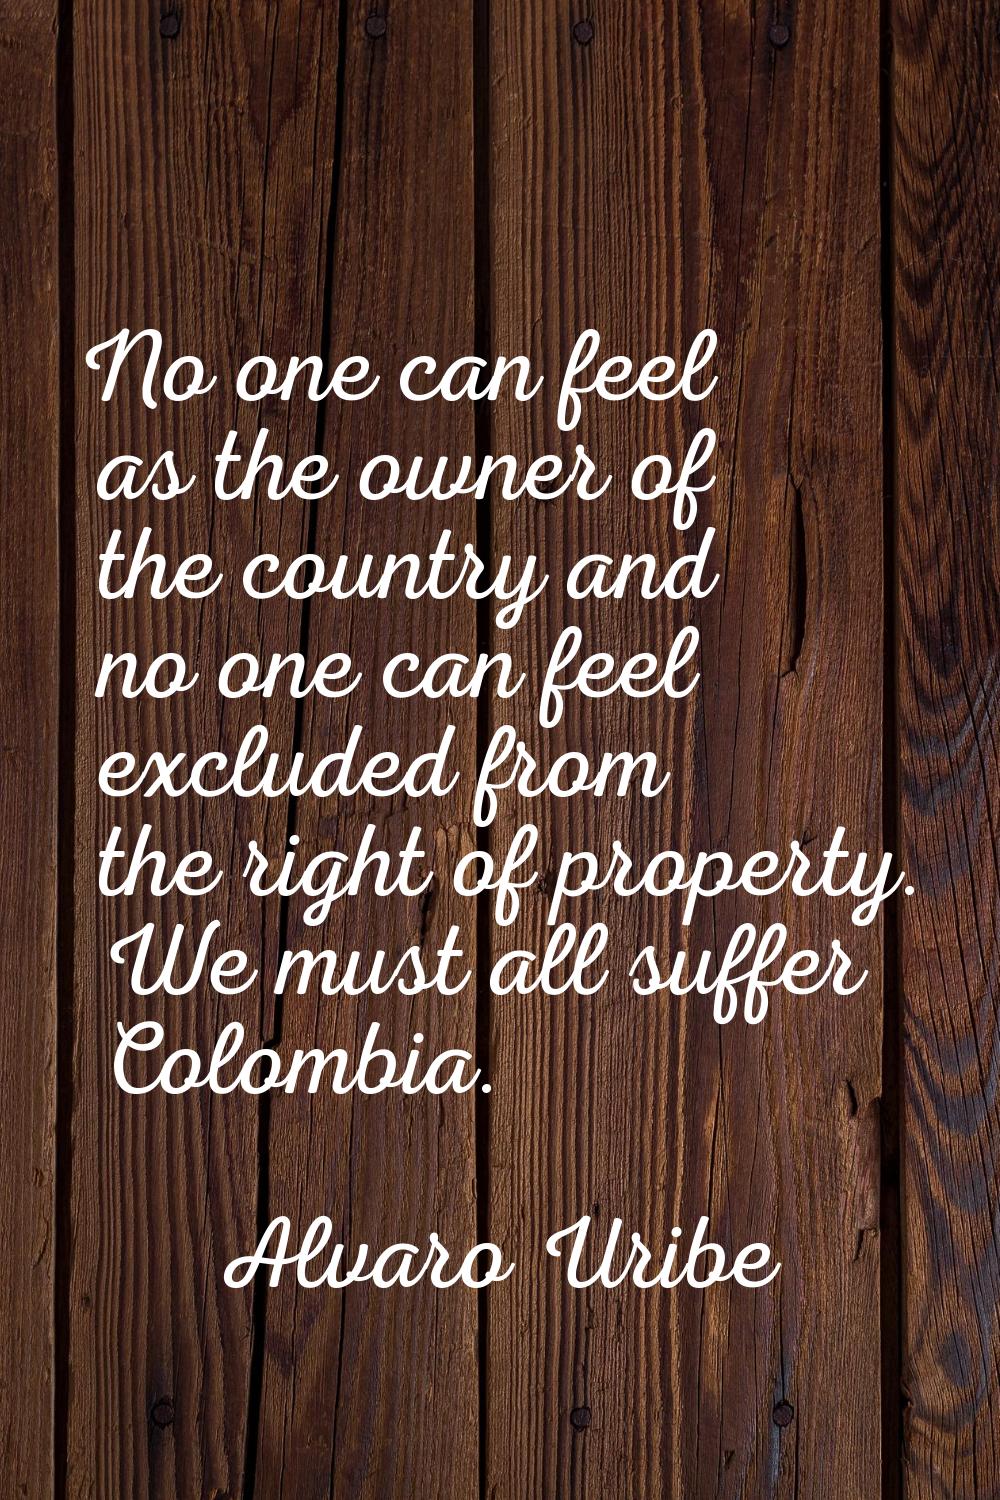 No one can feel as the owner of the country and no one can feel excluded from the right of property